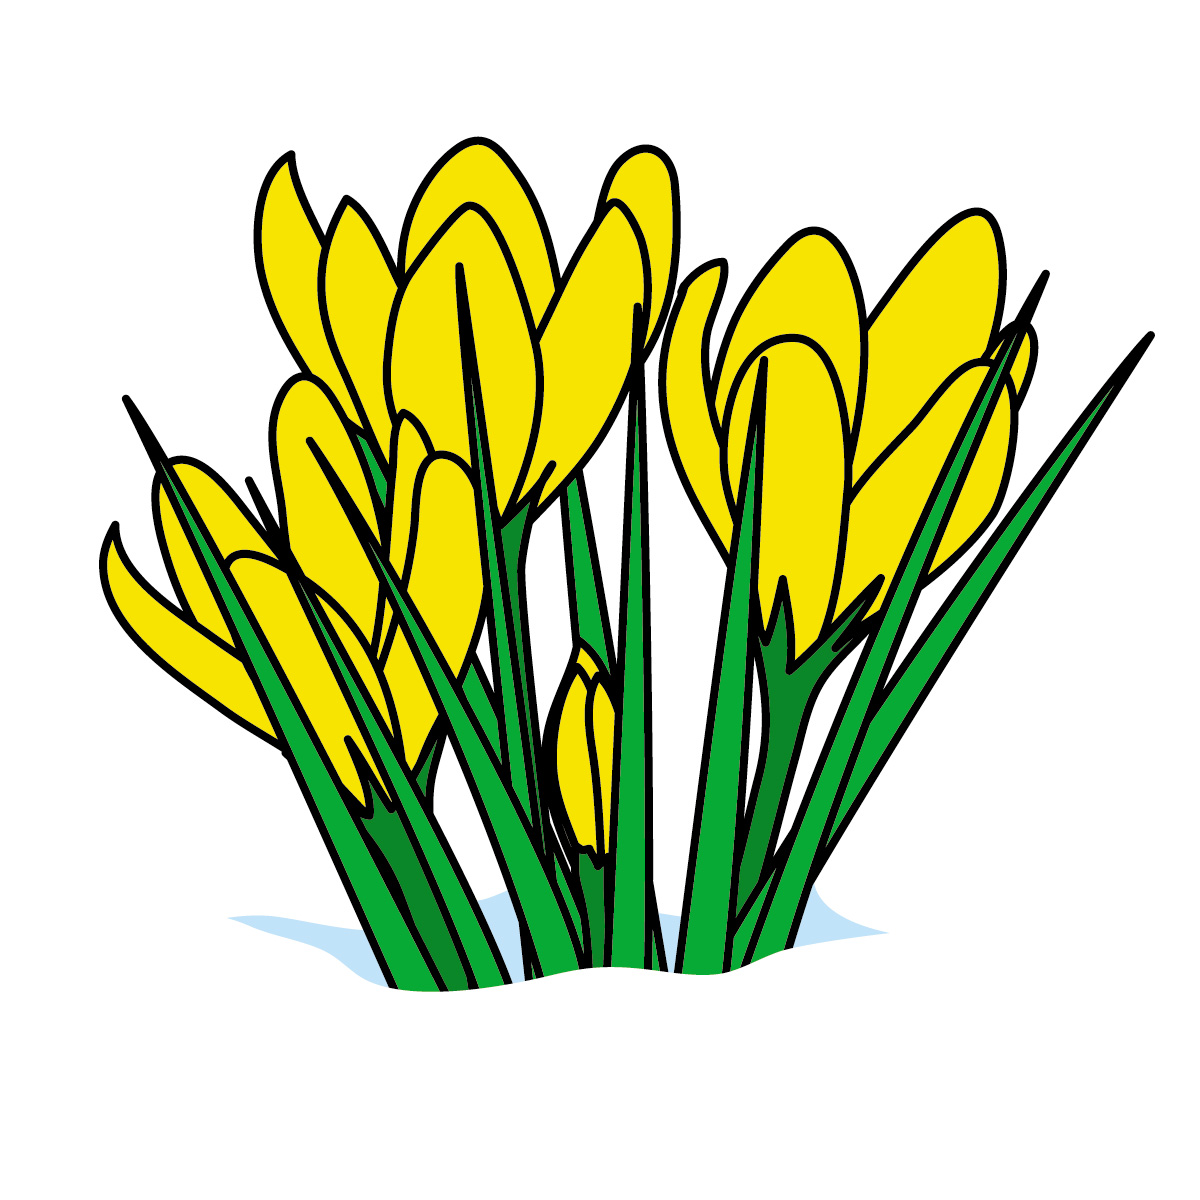 Religious Easter Flowers Clip Art Background 1 HD Wallpapers ...